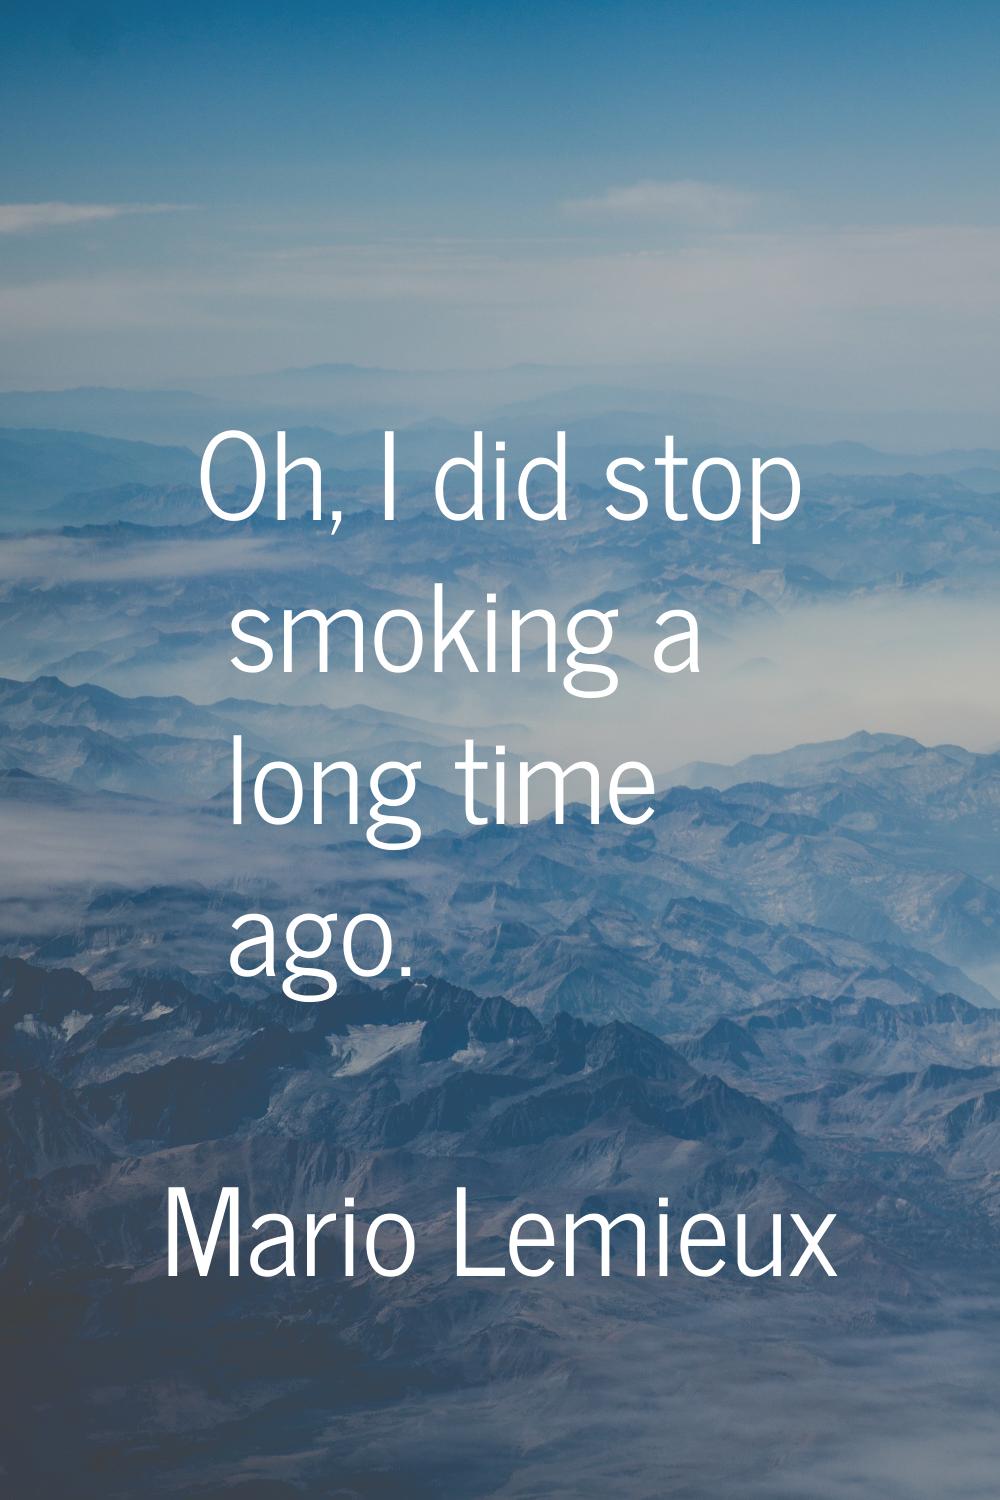 Oh, I did stop smoking a long time ago.